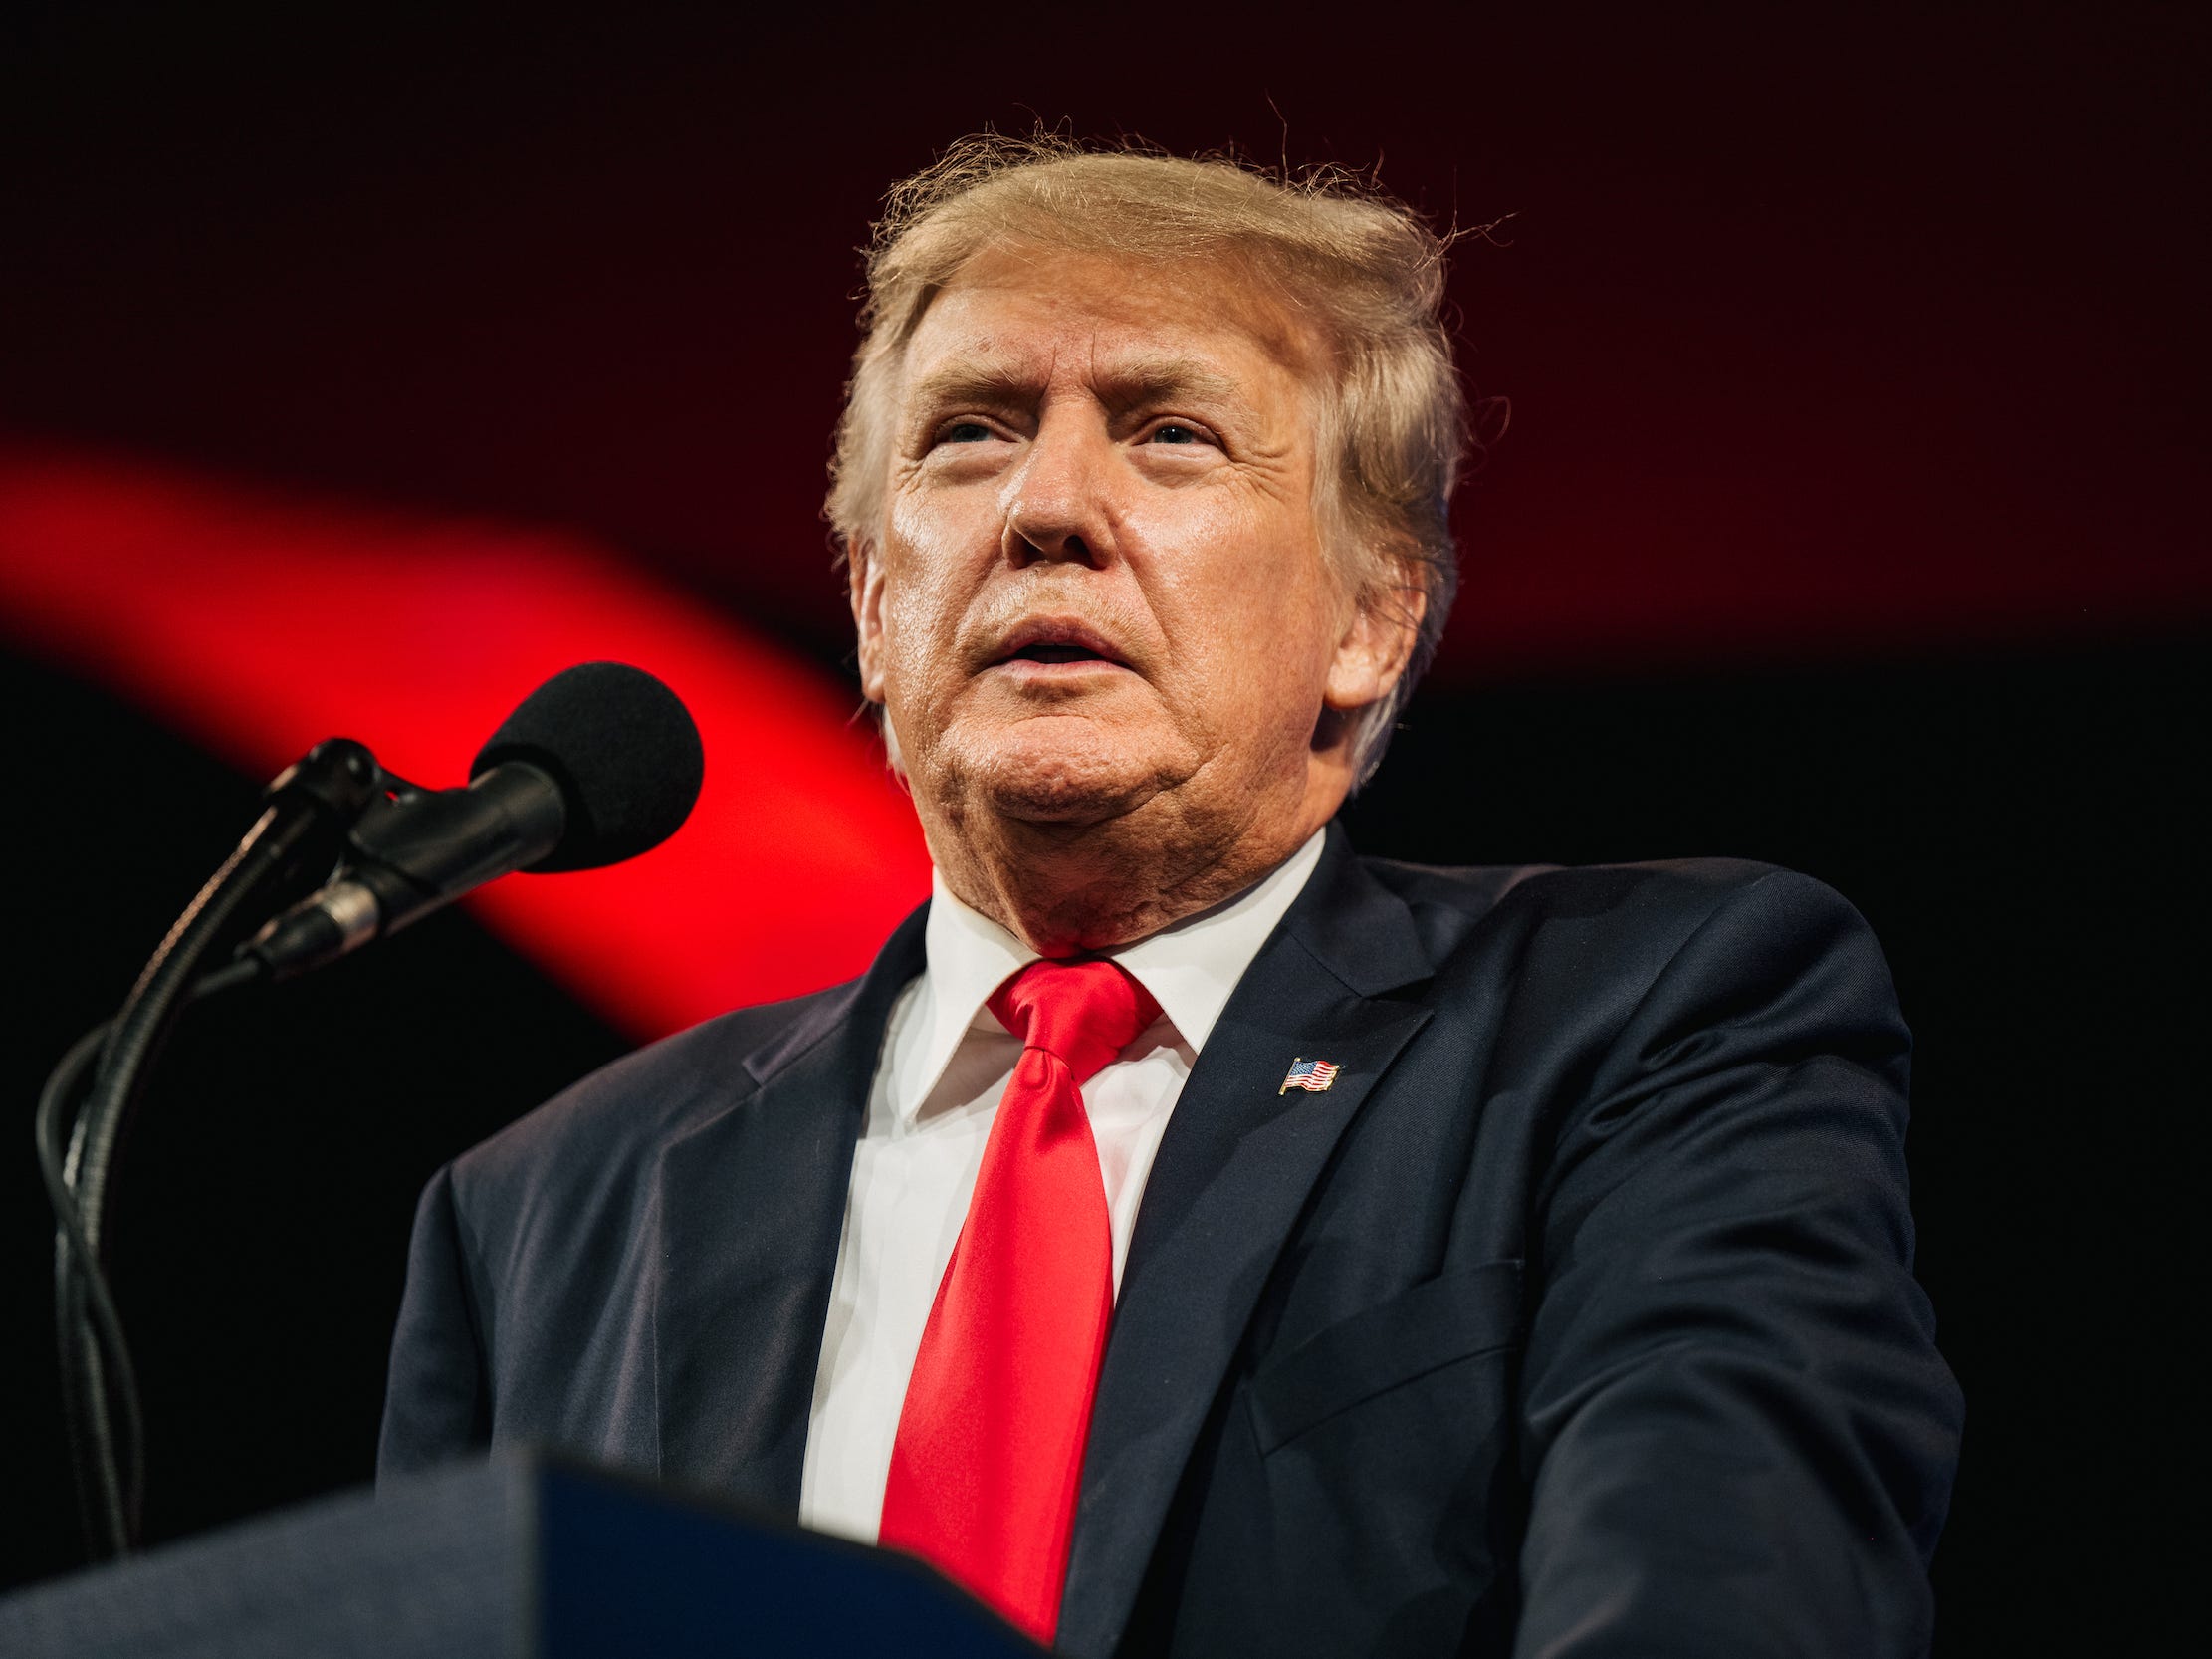 Former President Donald Trump prepares to speak during the Conservative Political Action Conference held at the Hilton Anatole on July 11, 2021 in Dallas, Texas. CPAC began in 1974, and is a conference that brings together and hosts conservative organizations, activists, and world leaders in discussing current events and future political agendas.